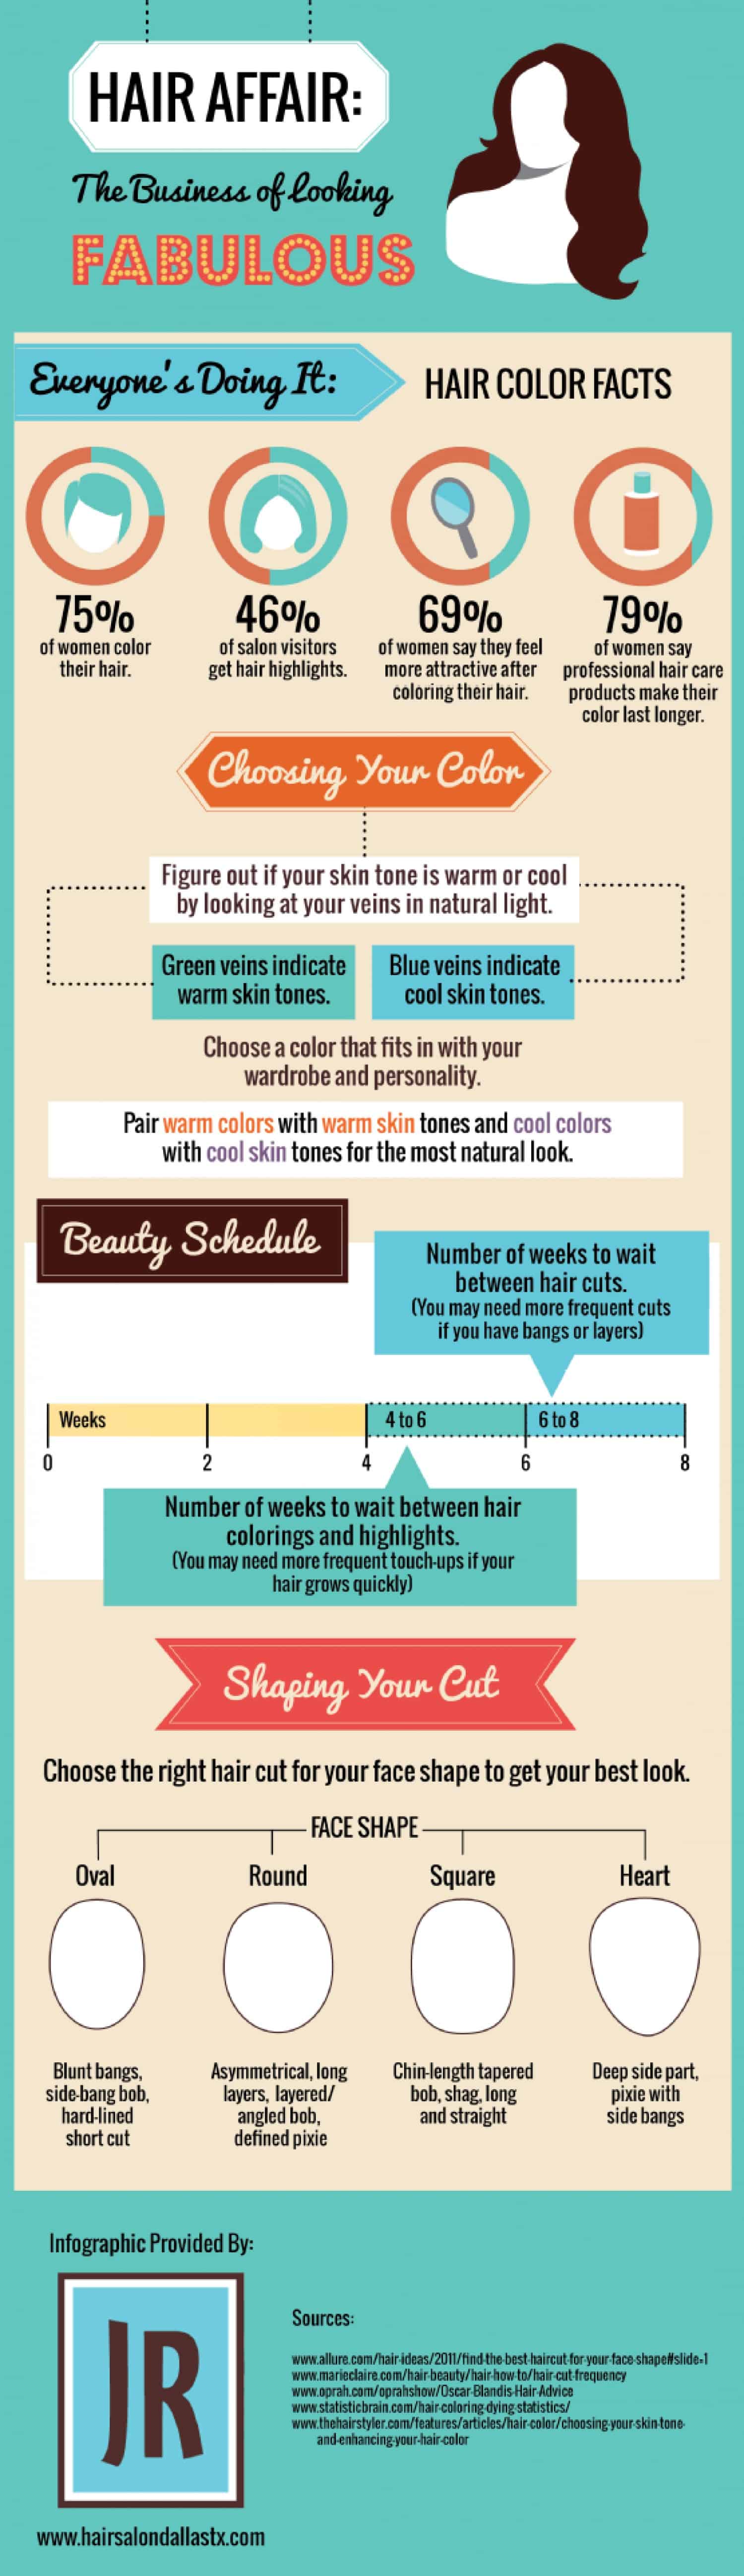 A Hair Affair: Planning Your Next Look | Daily Infographic